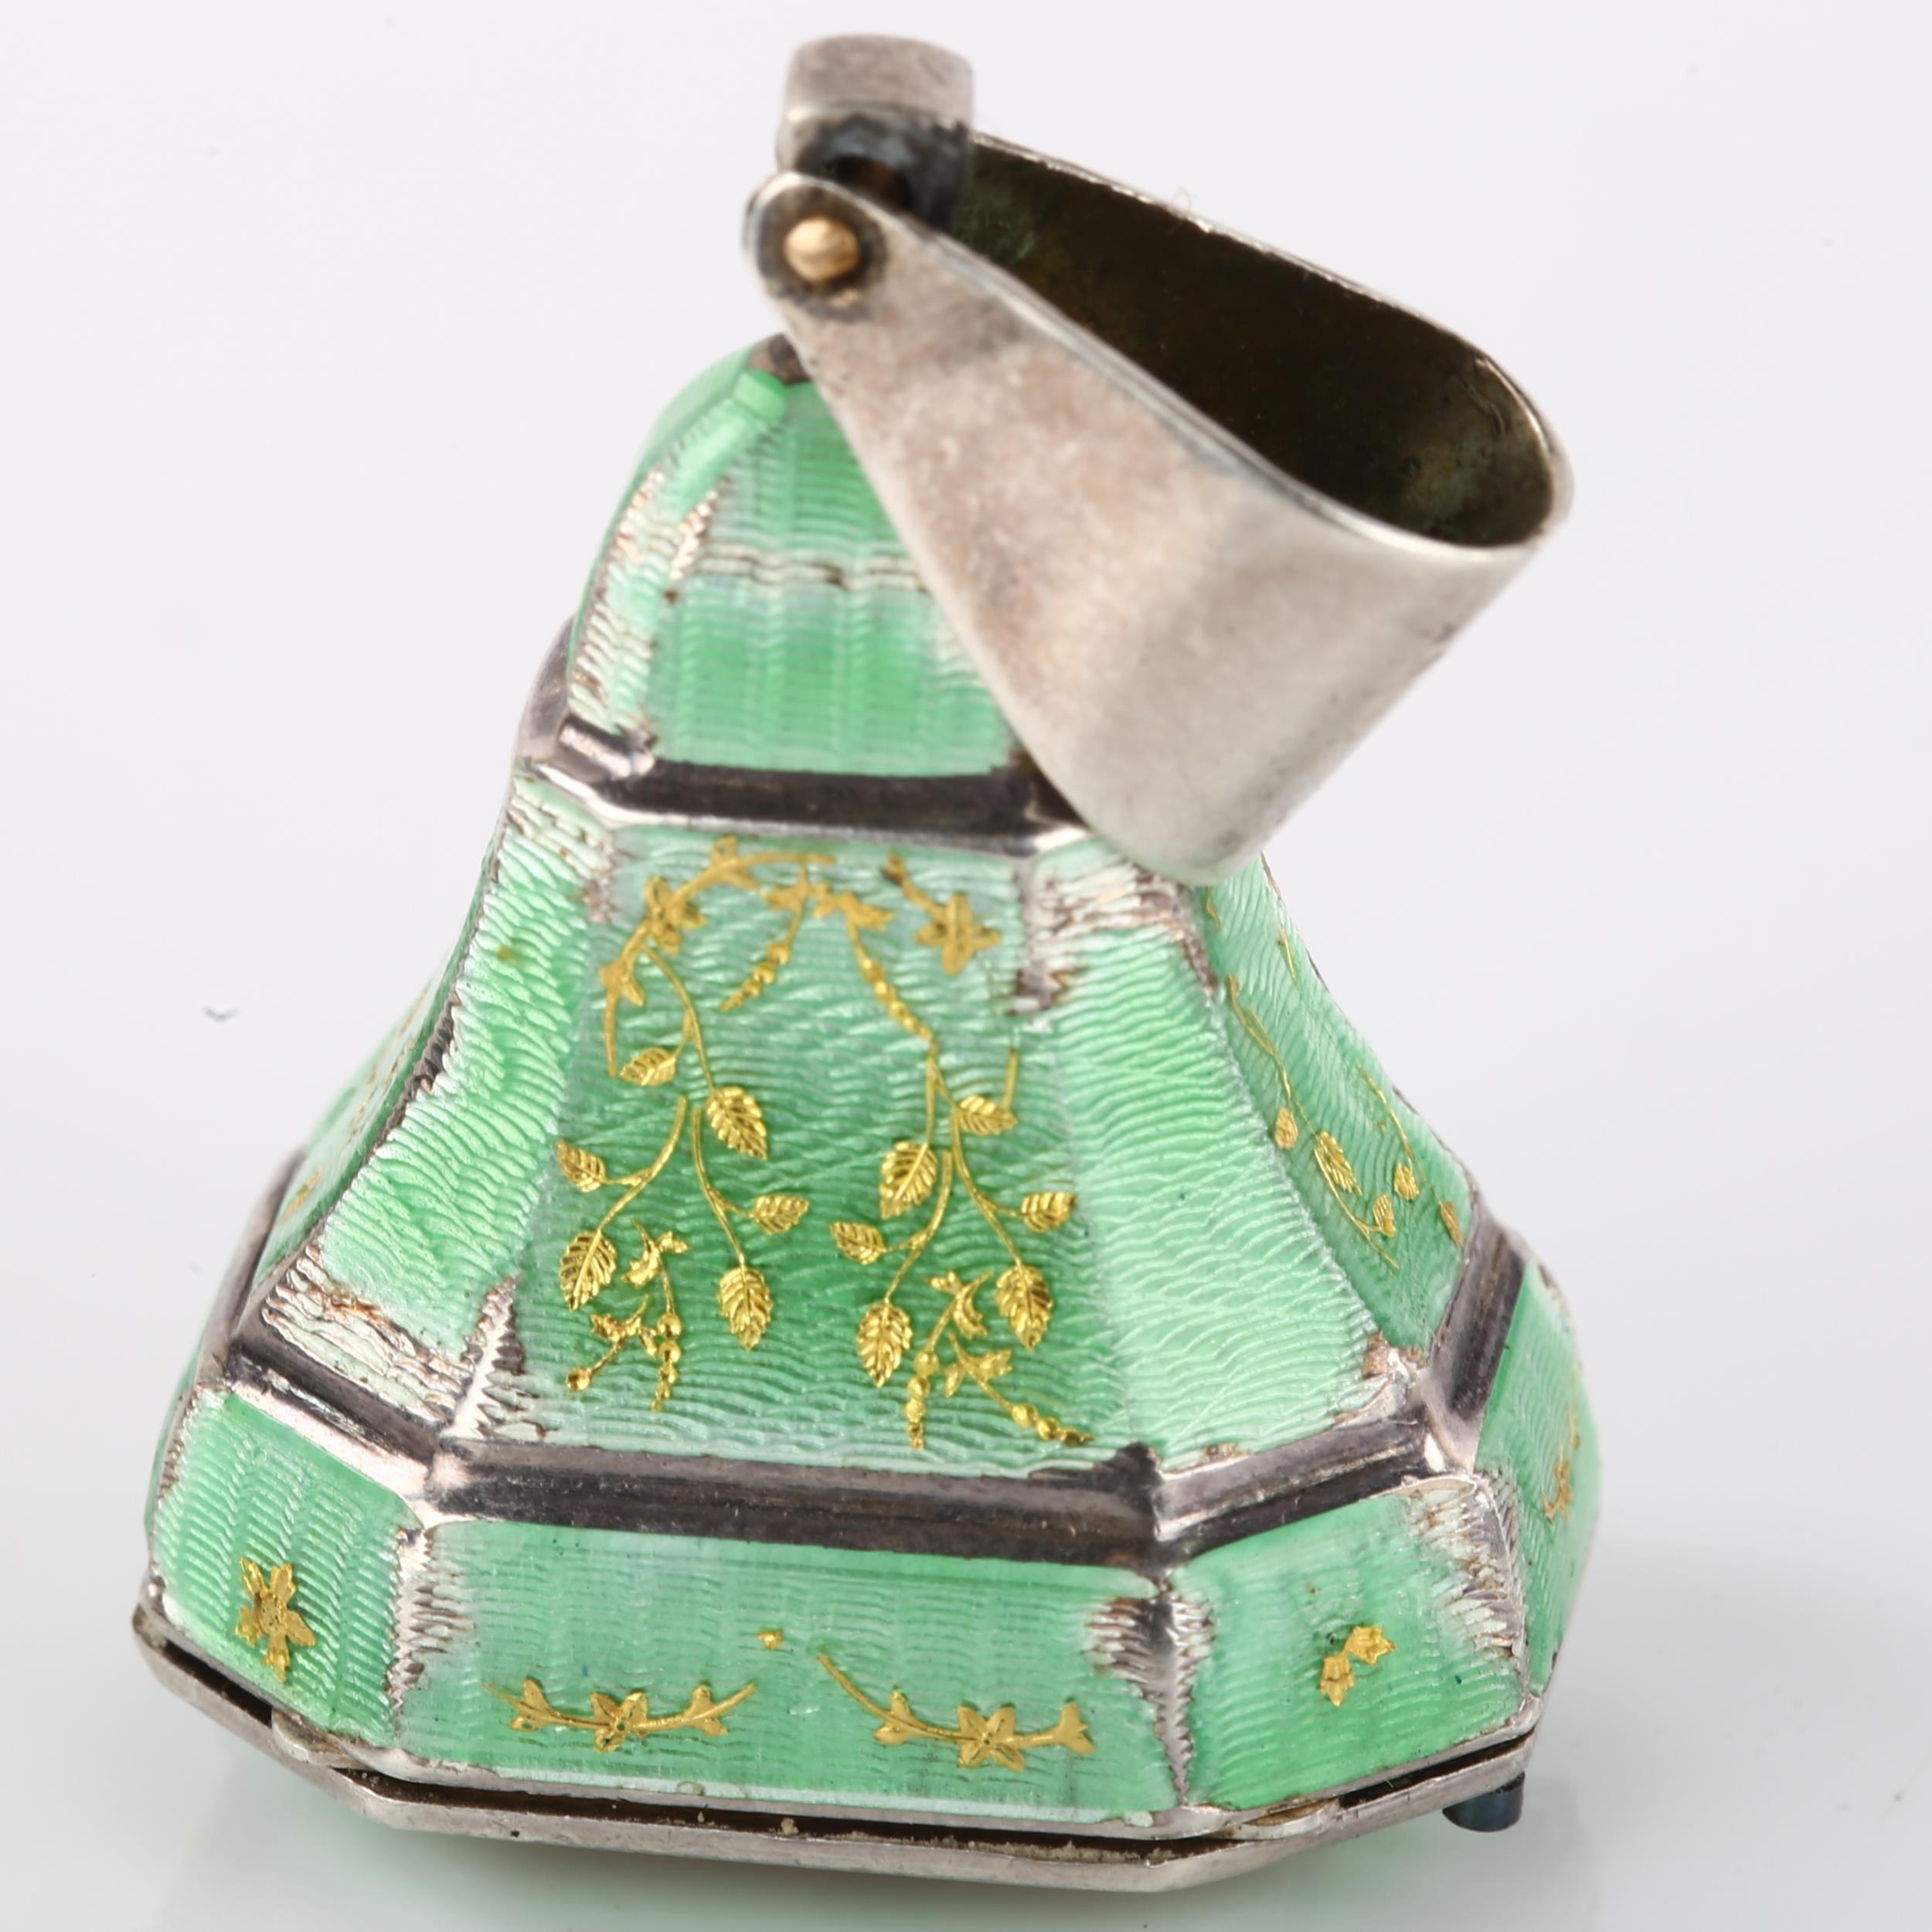 IDEAL WATCH - an early 20th century silver and green enamel mechanical pendant timepiece, silvered - Image 3 of 5